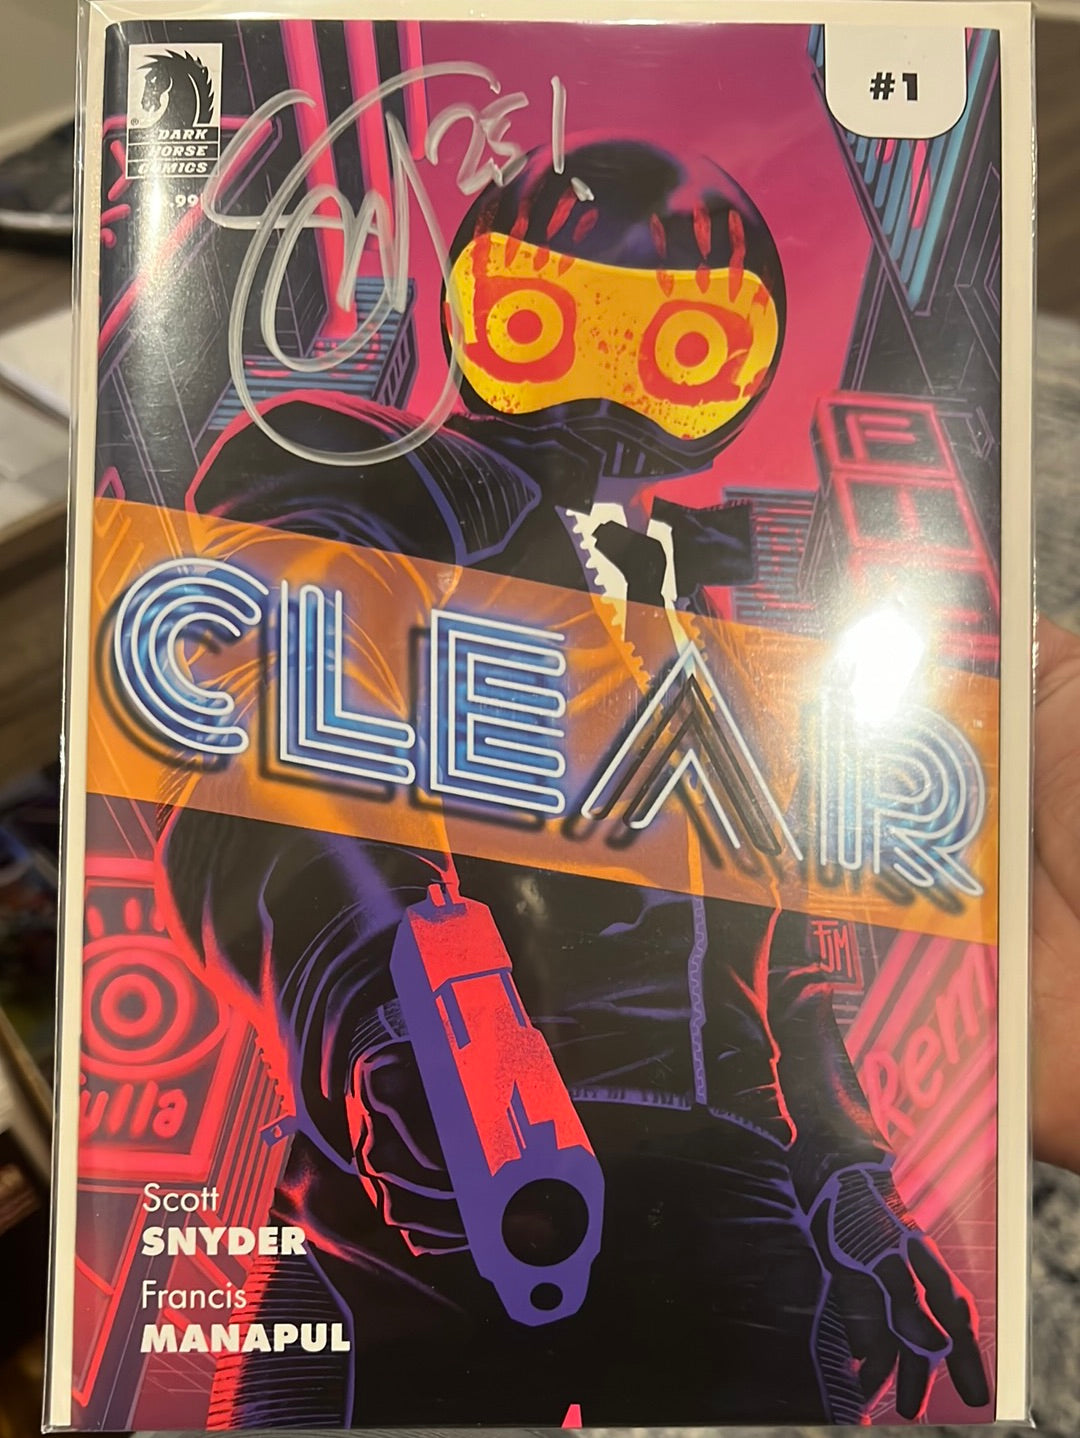 Clear #1 (Dark Horse Comics) signed by Scott Snyder